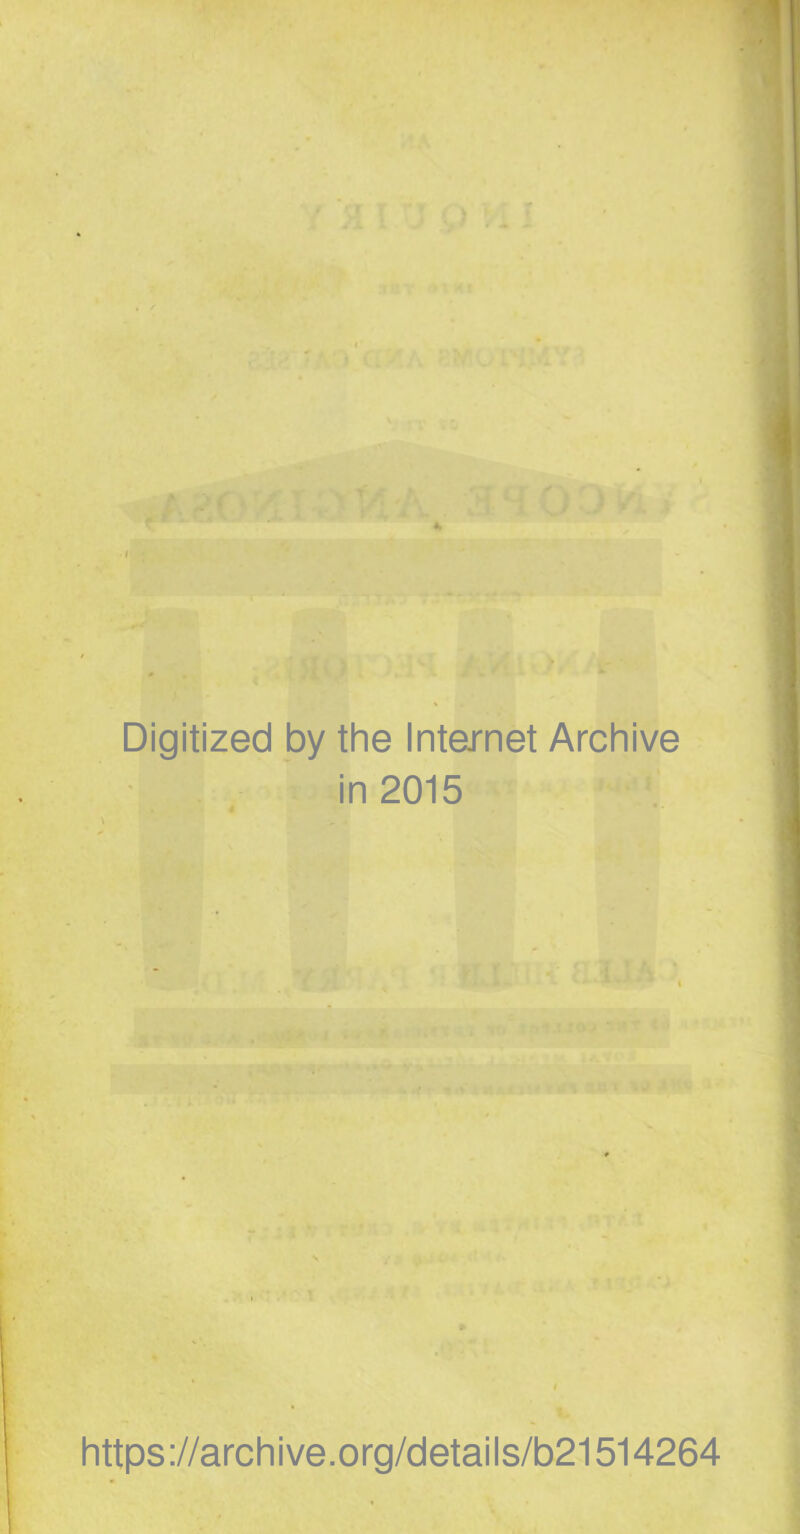 Digitized by the Internet Archive in 2015 https://archive.org/details/b21514264